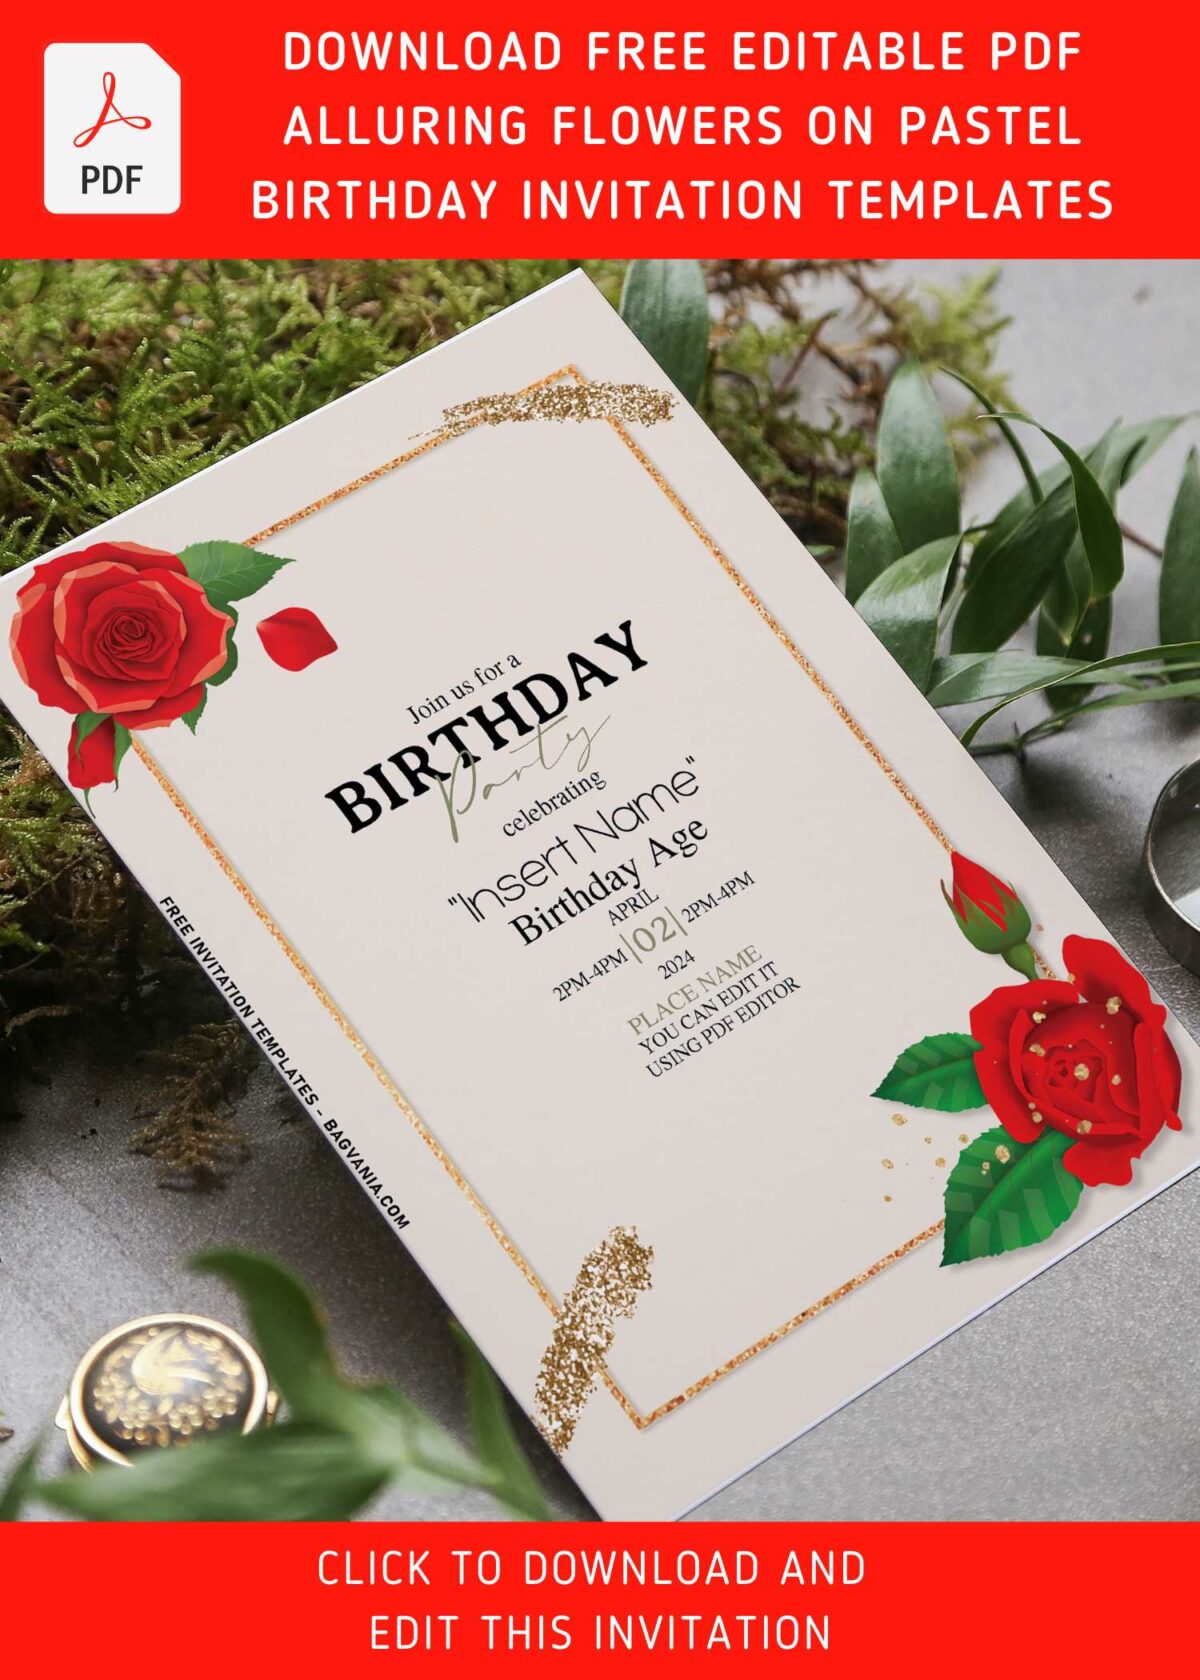 (Free Editable PDF) Natural Beauty Floral And Gold Birthday Invitation Templates with red rose